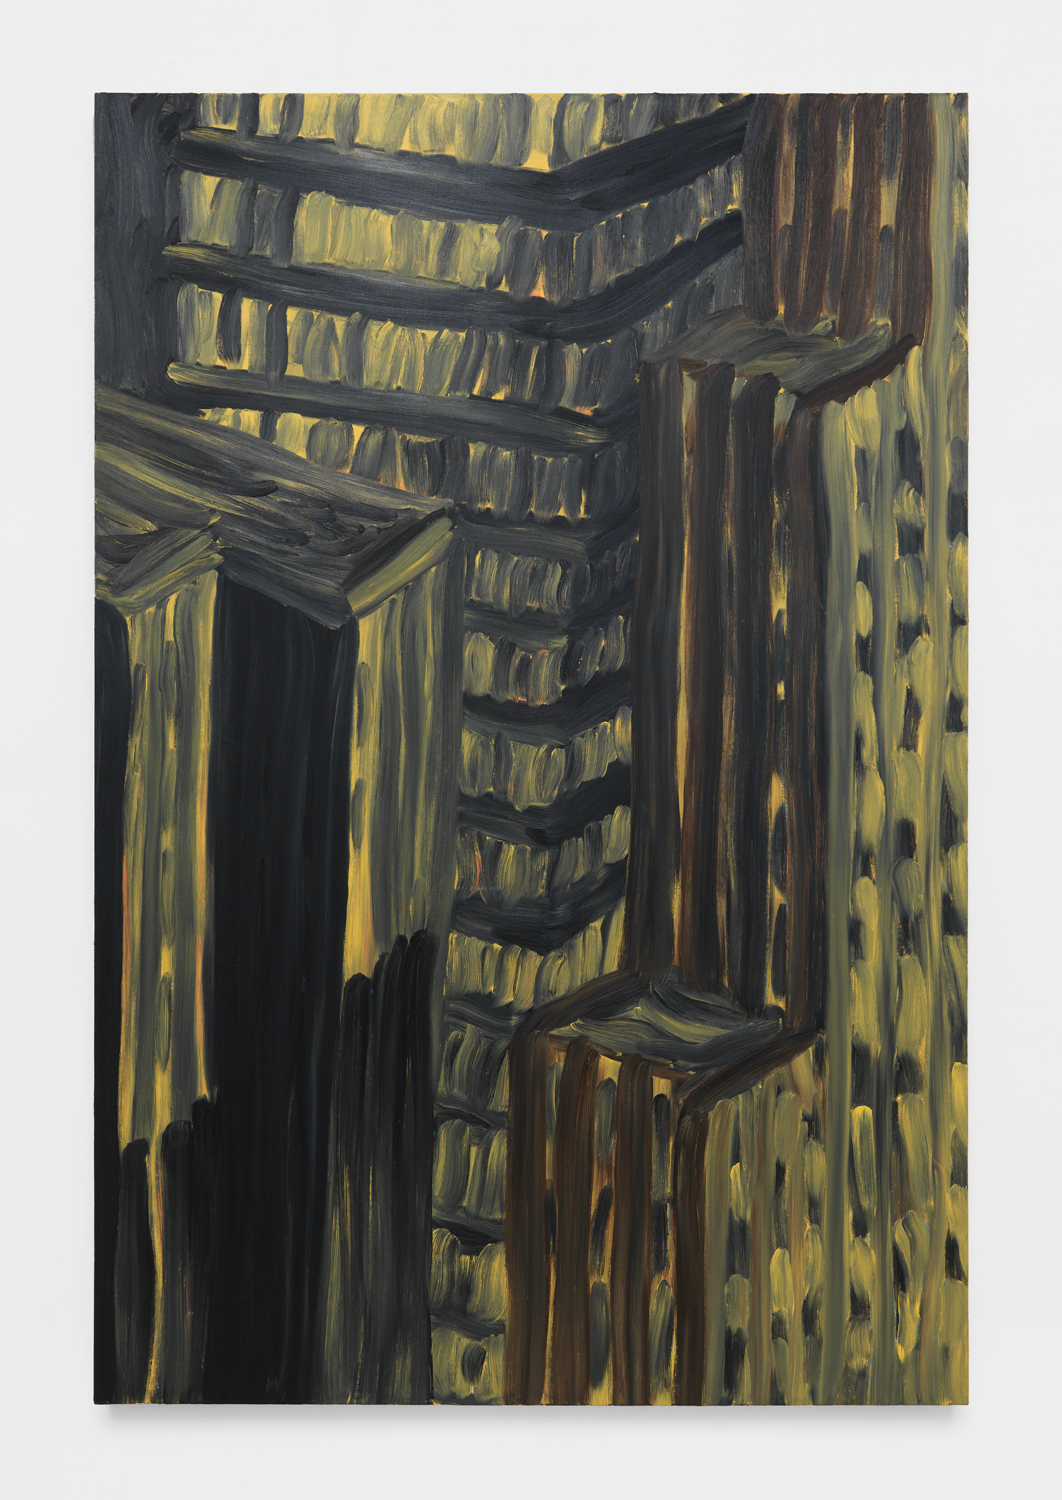 Martha Diamond, Untitled, c. 1980s, Oil on linen, 90h x 60w in, Exhibited at Independent NY, Magenta Plains, New York, NY, September 9–12, 2021.